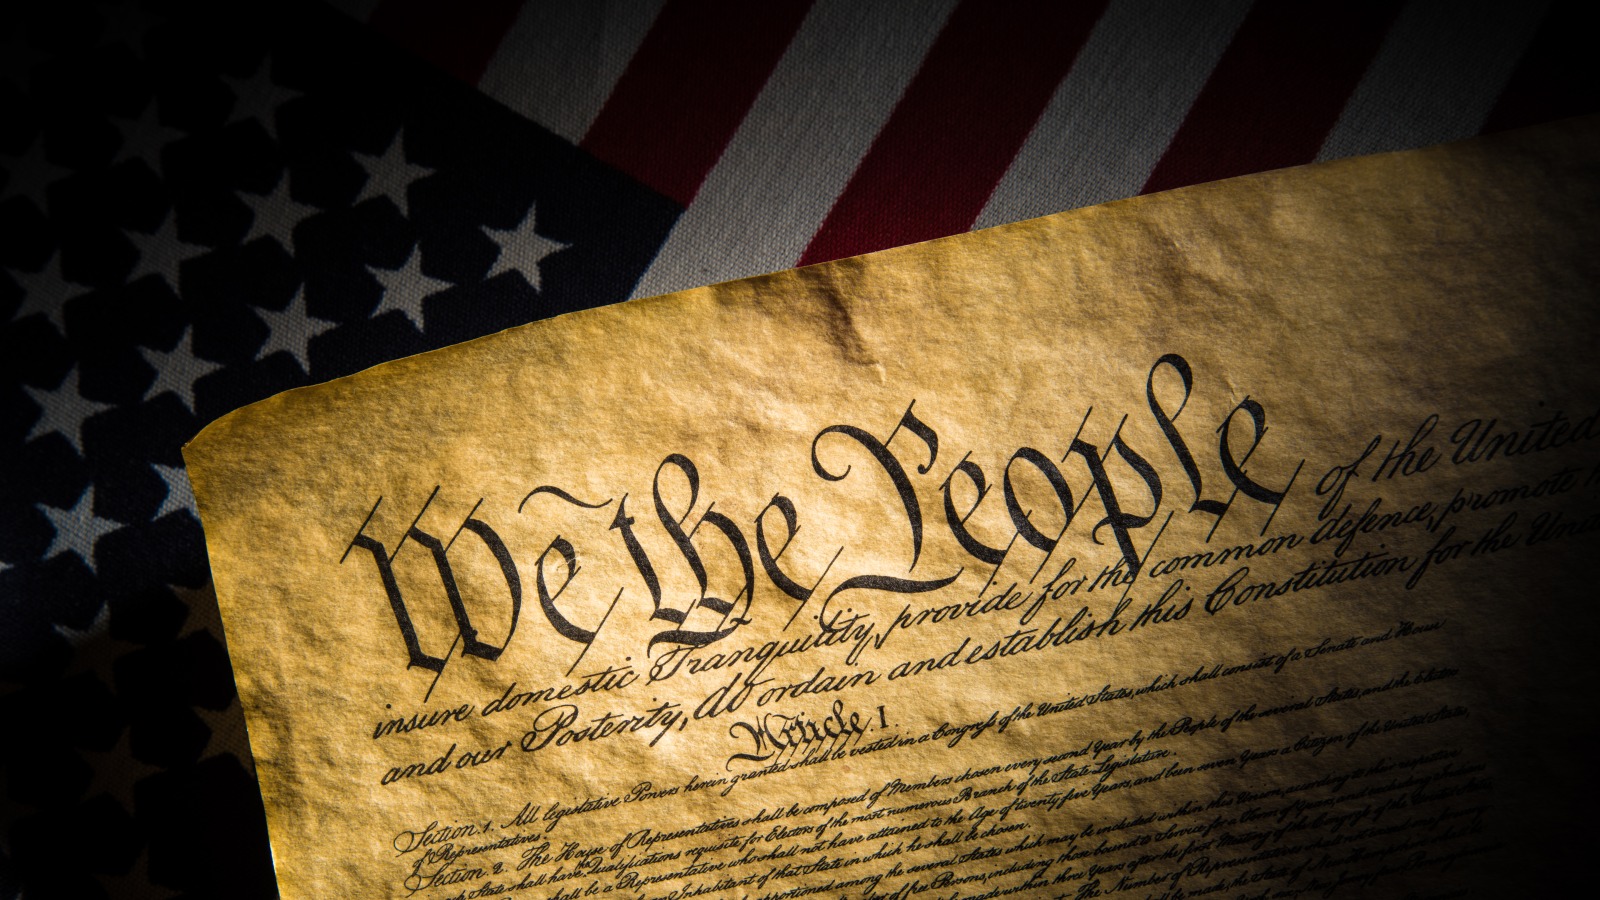 The Constitution of the United States of America: The by Founding Fathers